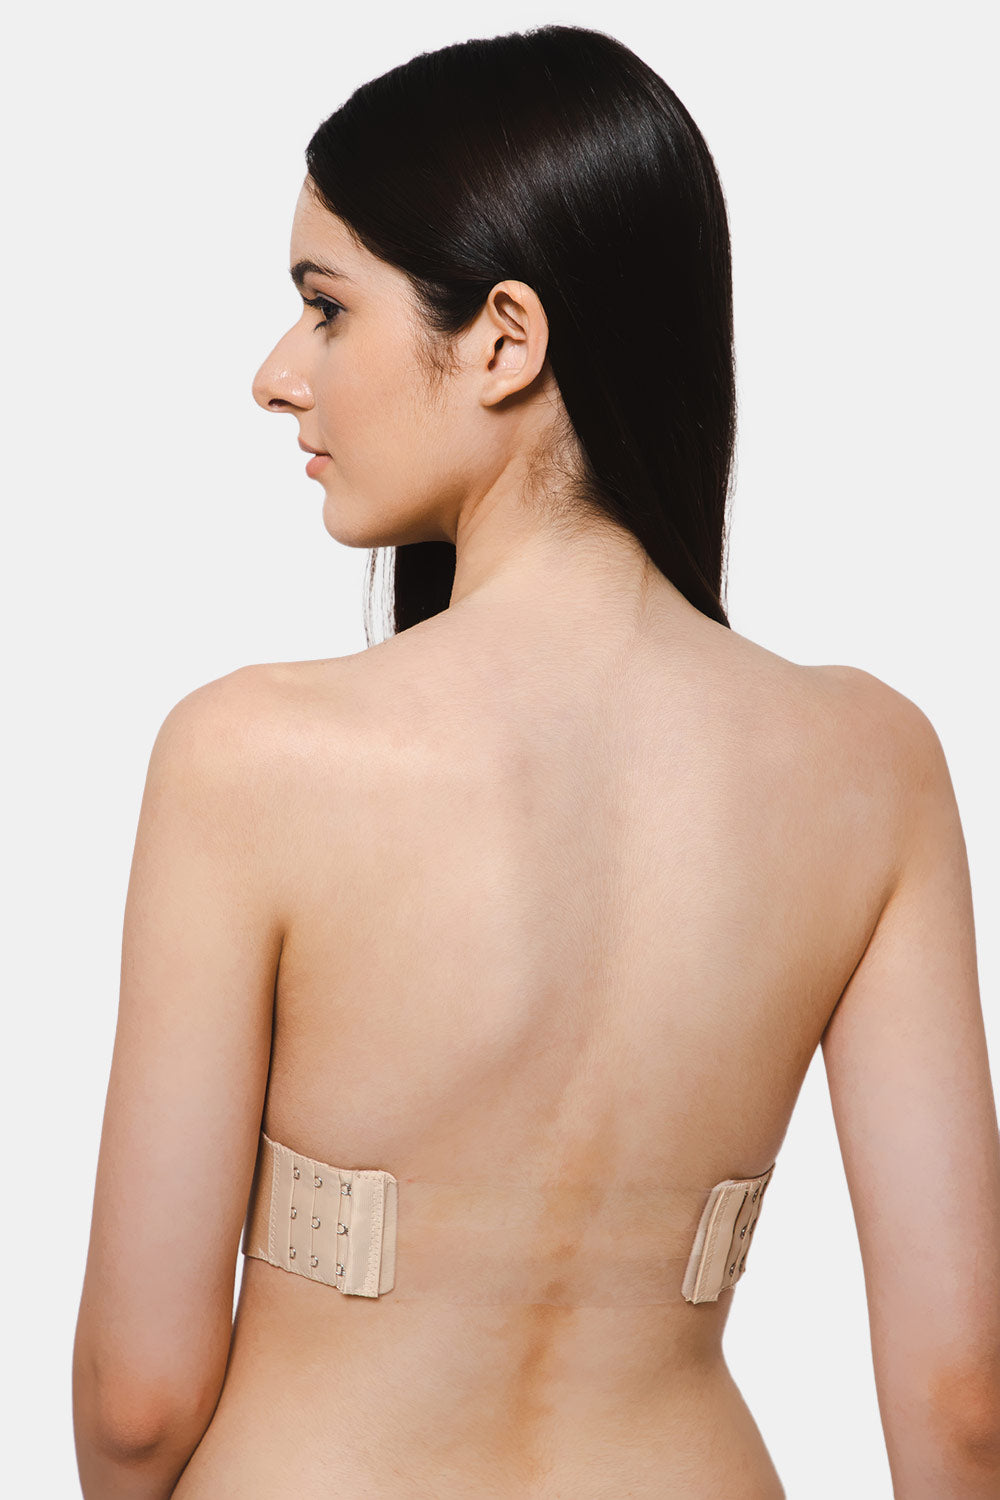 Lwear Women's Strapless Backless Clear Back Straps India